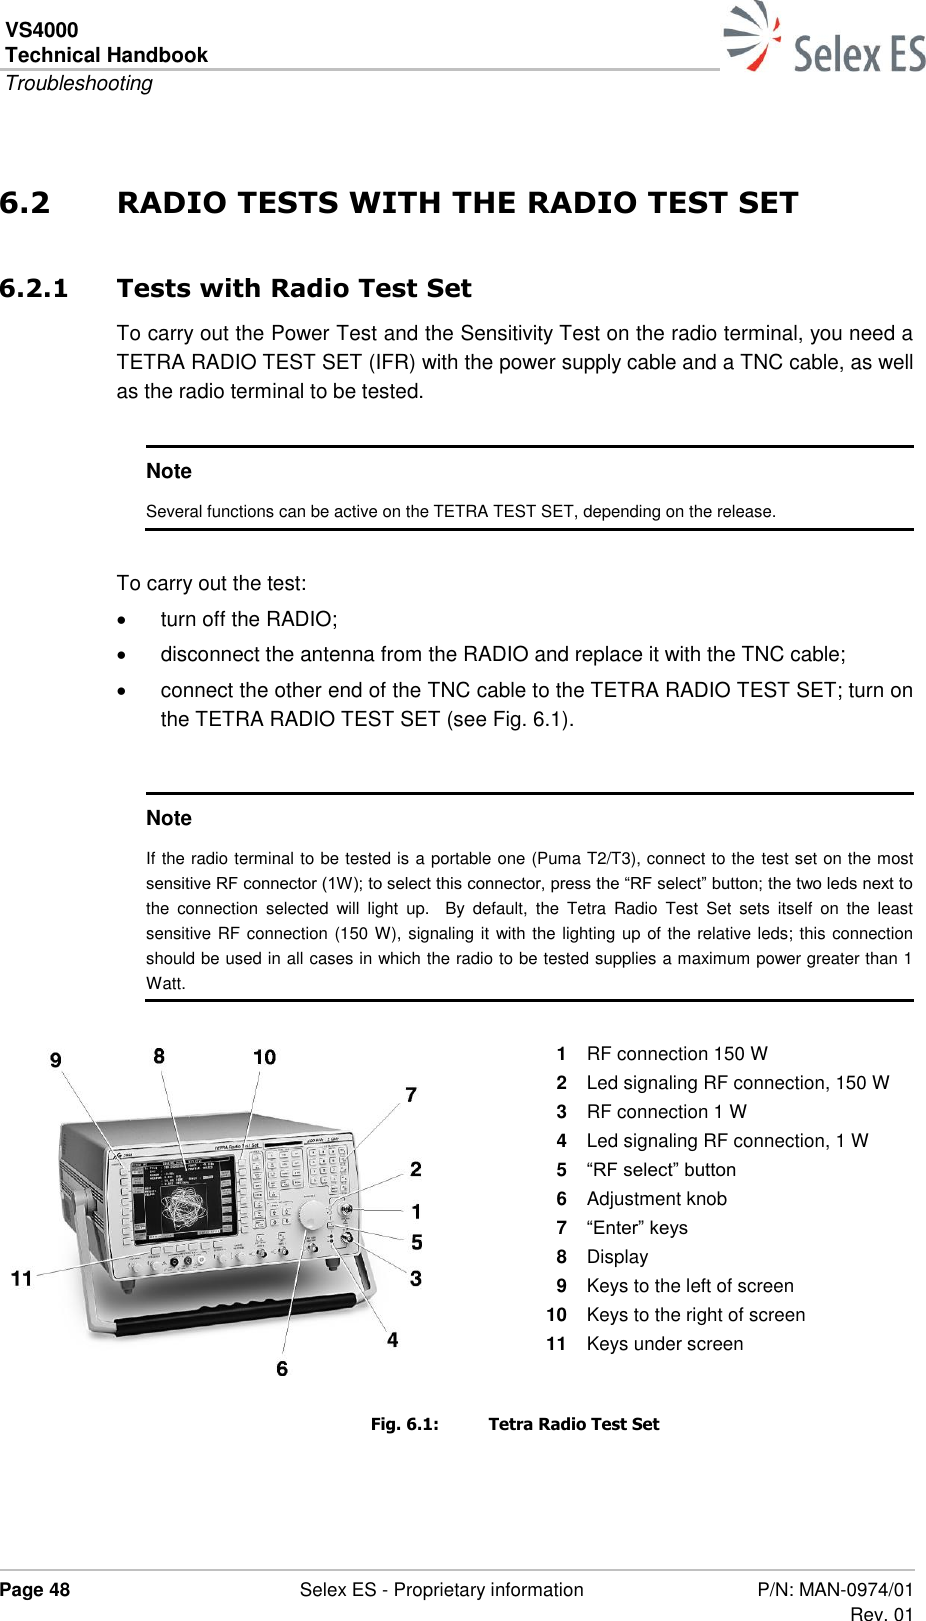 VS4000 Technical Handbook  Troubleshooting  Page 48  Selex ES - Proprietary information P/N: MAN-0974/01 Rev. 01  6.2 RADIO TESTS WITH THE RADIO TEST SET 6.2.1 Tests with Radio Test Set To carry out the Power Test and the Sensitivity Test on the radio terminal, you need a TETRA RADIO TEST SET (IFR) with the power supply cable and a TNC cable, as well as the radio terminal to be tested.  Note Several functions can be active on the TETRA TEST SET, depending on the release.  To carry out the test:   turn off the RADIO;   disconnect the antenna from the RADIO and replace it with the TNC cable;   connect the other end of the TNC cable to the TETRA RADIO TEST SET; turn on the TETRA RADIO TEST SET (see Fig. 6.1).  Note If the radio terminal to be tested is a portable one (Puma T2/T3), connect to the test set on the most sensitive RF connector (1W); to select this connector, press the “RF select” button; the two leds next to the  connection  selected  will  light  up.    By  default,  the  Tetra  Radio  Test  Set  sets  itself  on  the  least sensitive RF connection (150 W), signaling it with the lighting up of the relative leds; this connection should be used in all cases in which the radio to be tested supplies a maximum power greater than 1 Watt.  1  RF connection 150 W 2  Led signaling RF connection, 150 W 3  RF connection 1 W 4  Led signaling RF connection, 1 W 5  “RF select” button 6  Adjustment knob 7  “Enter” keys 8  Display 9  Keys to the left of screen 10  Keys to the right of screen 11  Keys under screen  Fig. 6.1:  Tetra Radio Test Set 